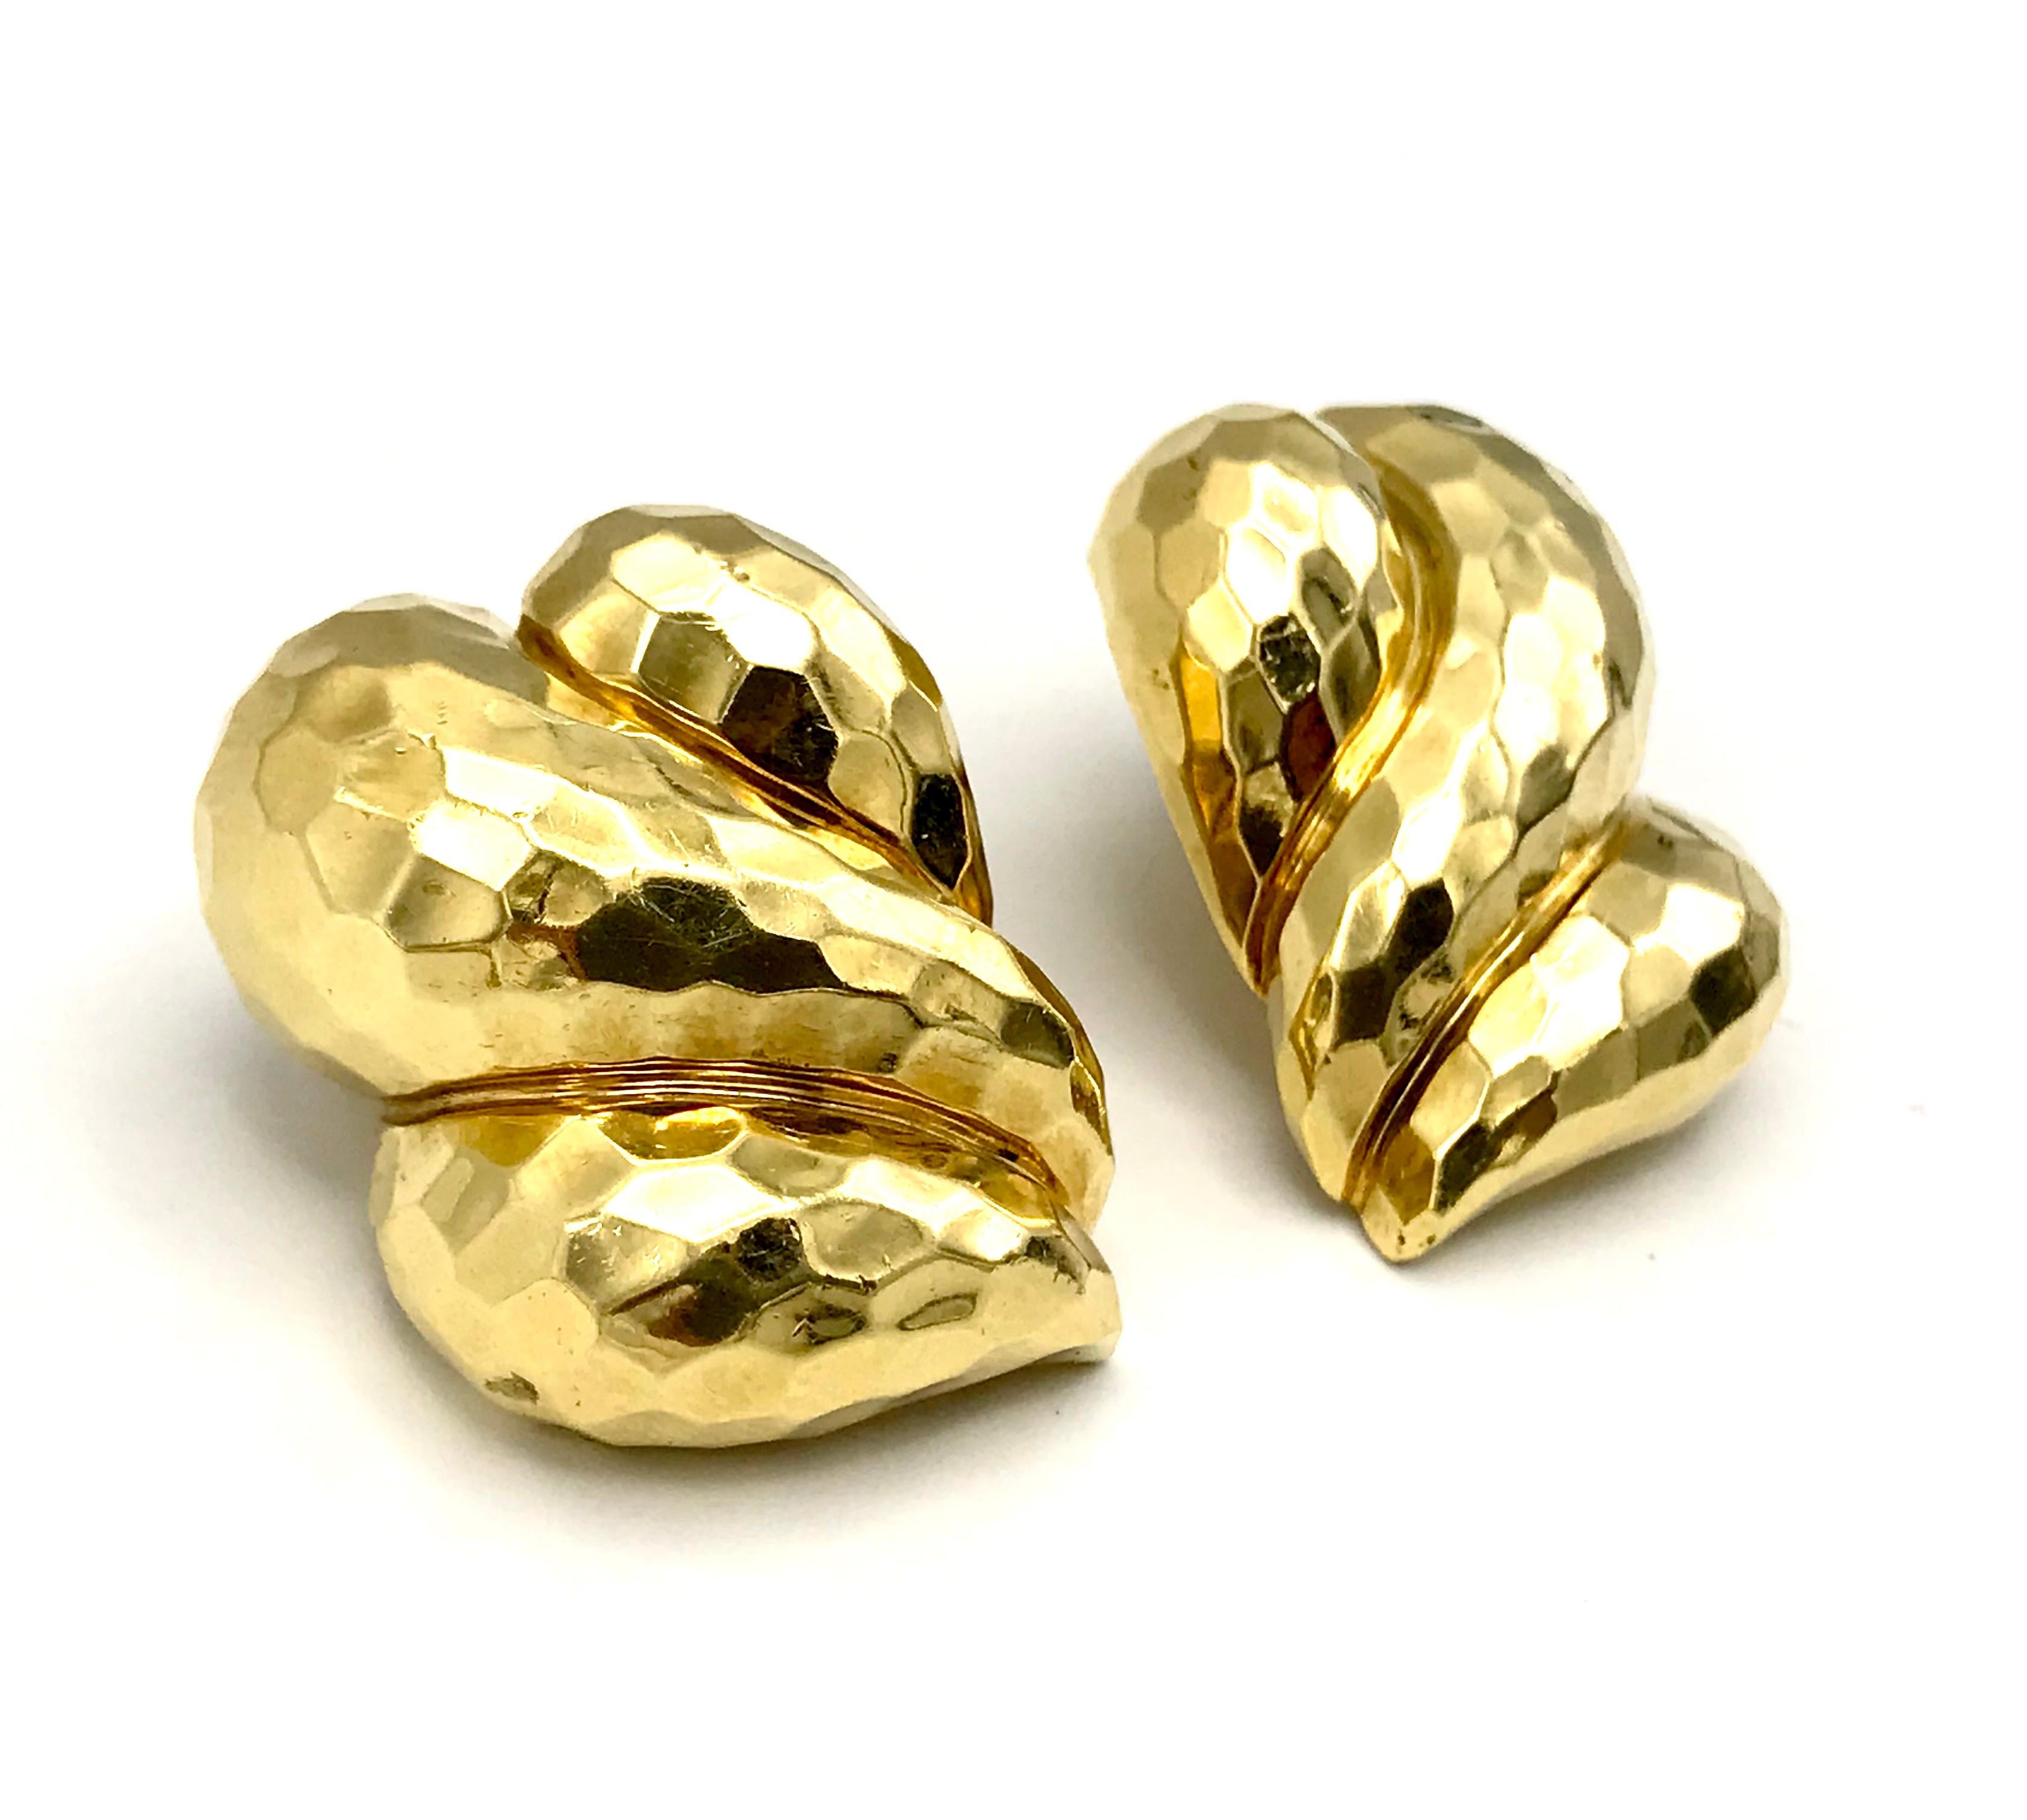 18k yellow gold Henry Dunay clip-on earrings designed in Dunay's recognizable hammered style. Stamped with Henry Dunay maker's mark and a hallmark for 18k gold. 
Measurements: 1 1/8